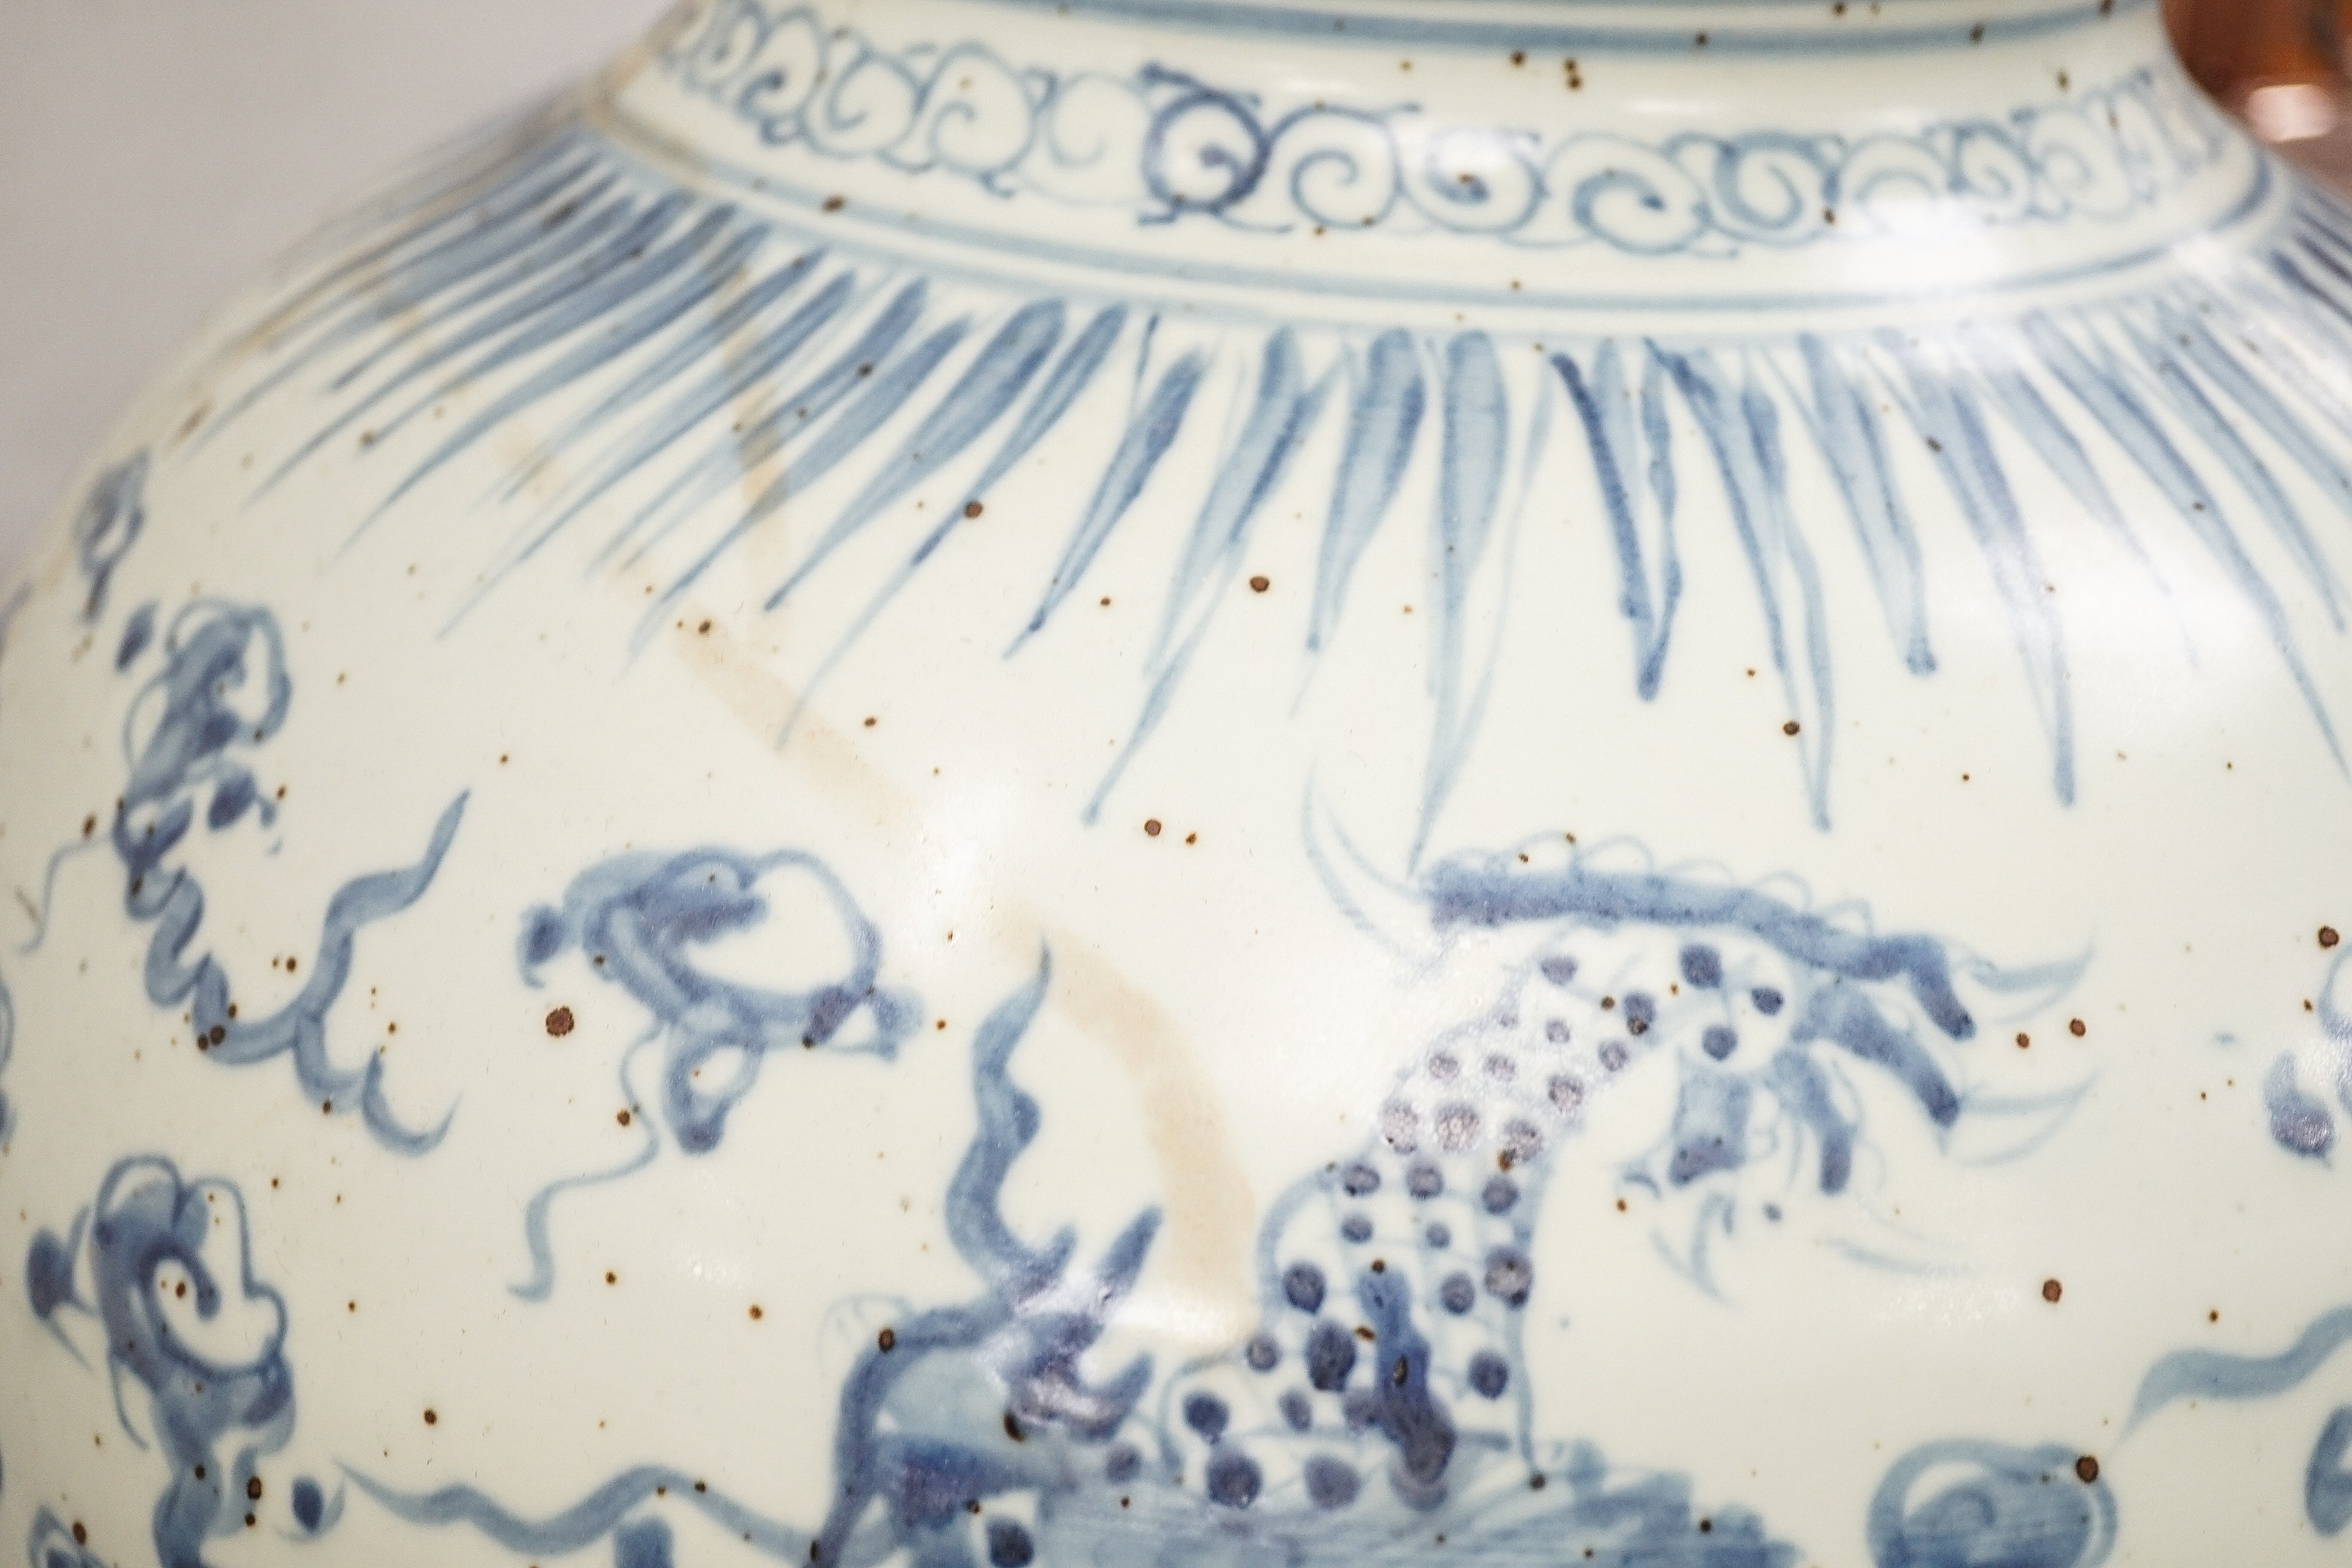 A large Chinese blue and white 'dragon' double gourd vase, 64cm high and an Annamesse style blue and white crackle glaze jar